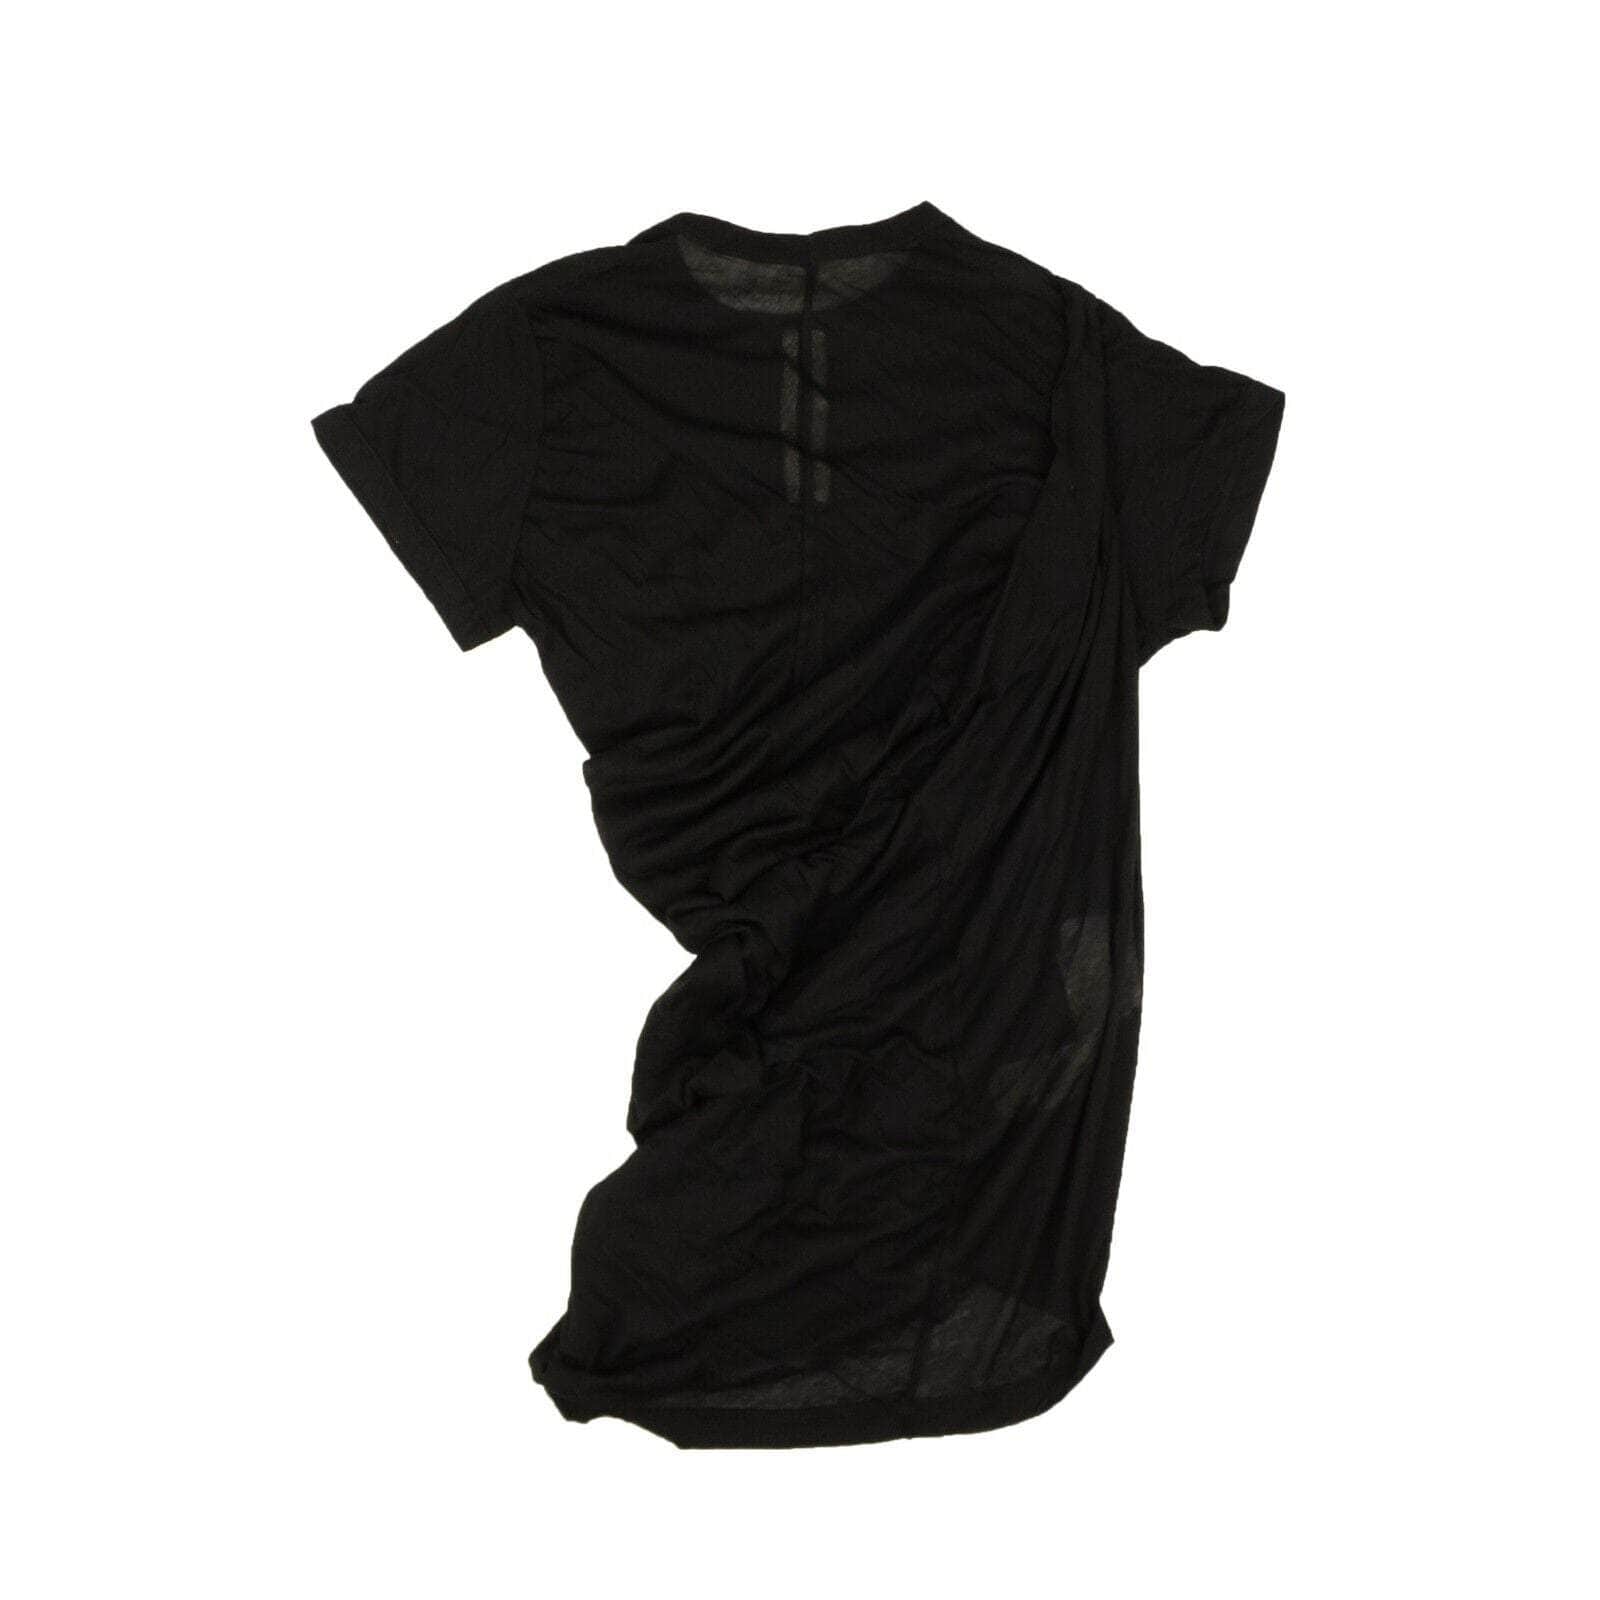 Rick Owens channelenable-all, chicmi, couponcollection, gender-womens, main-clothing, rick-owens, size-42, under-250 42 Black Cotton Anthem Short Sleeve T-Shirt 95-ROW-1027/42 95-ROW-1027/42